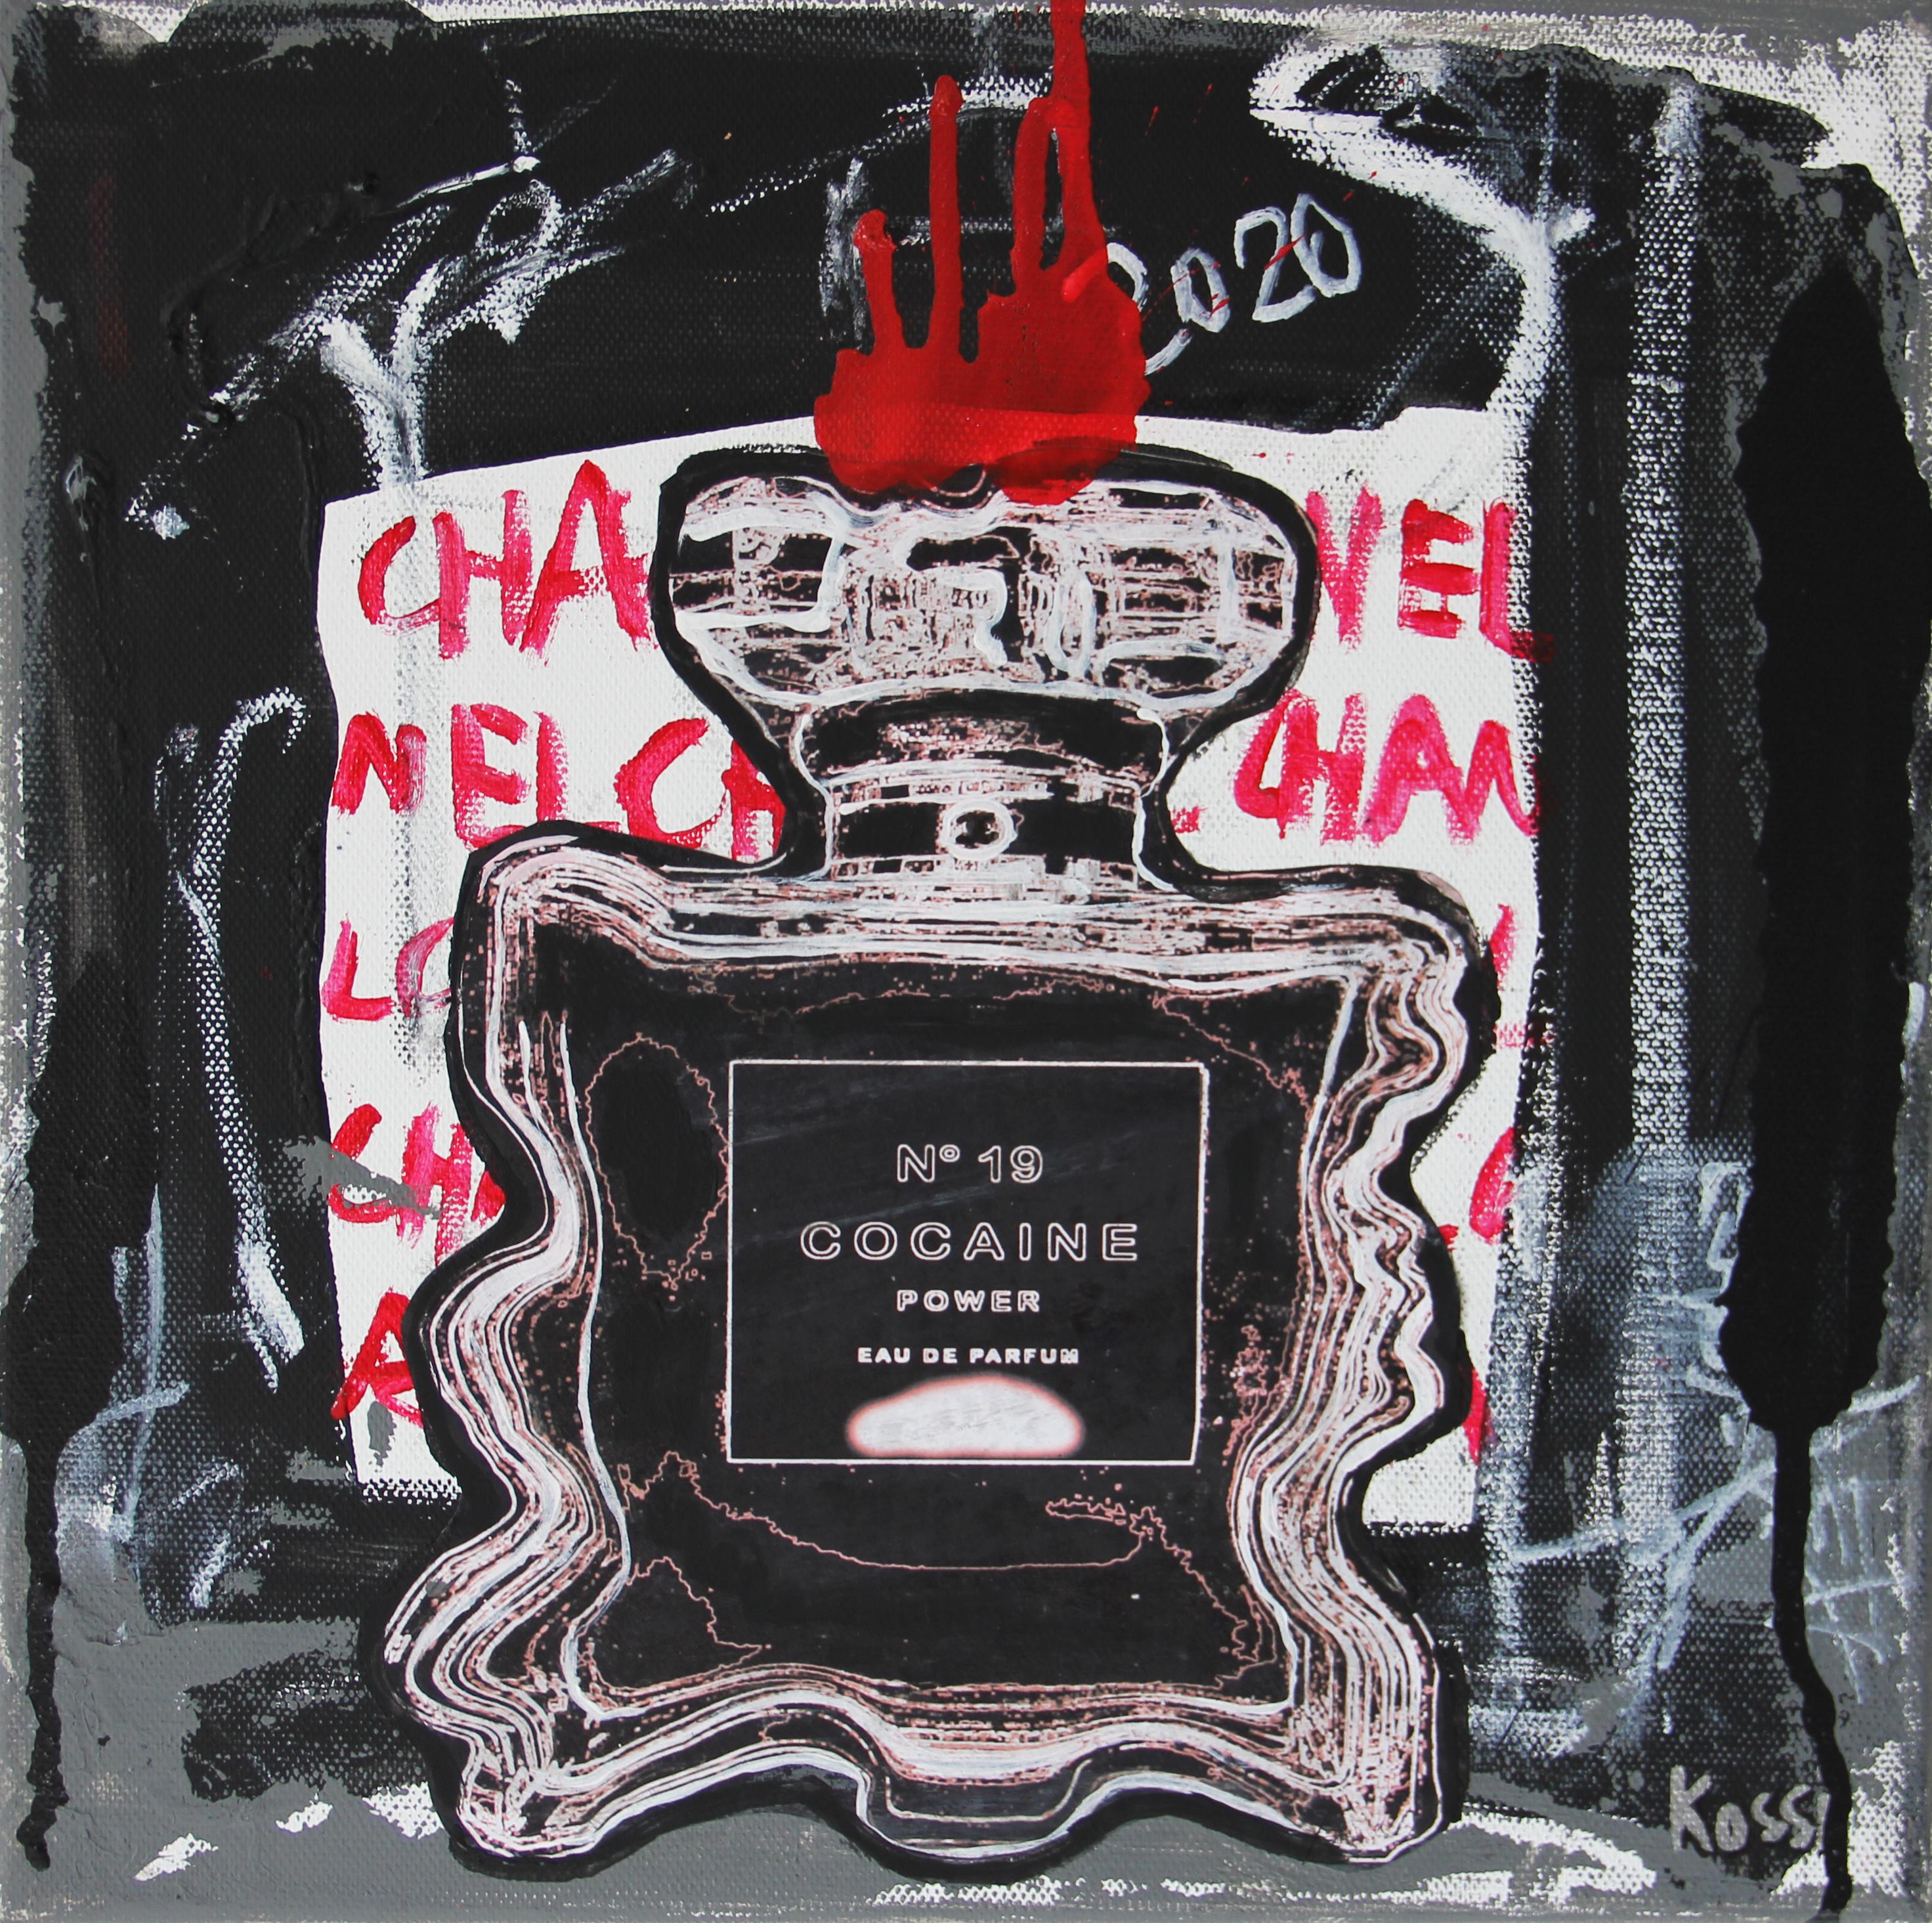 Kristin Kossi Still-Life Painting - Nr. 19 Cocaine Power -black, red, expressive, Contemporary, Pop Art, Chanel 